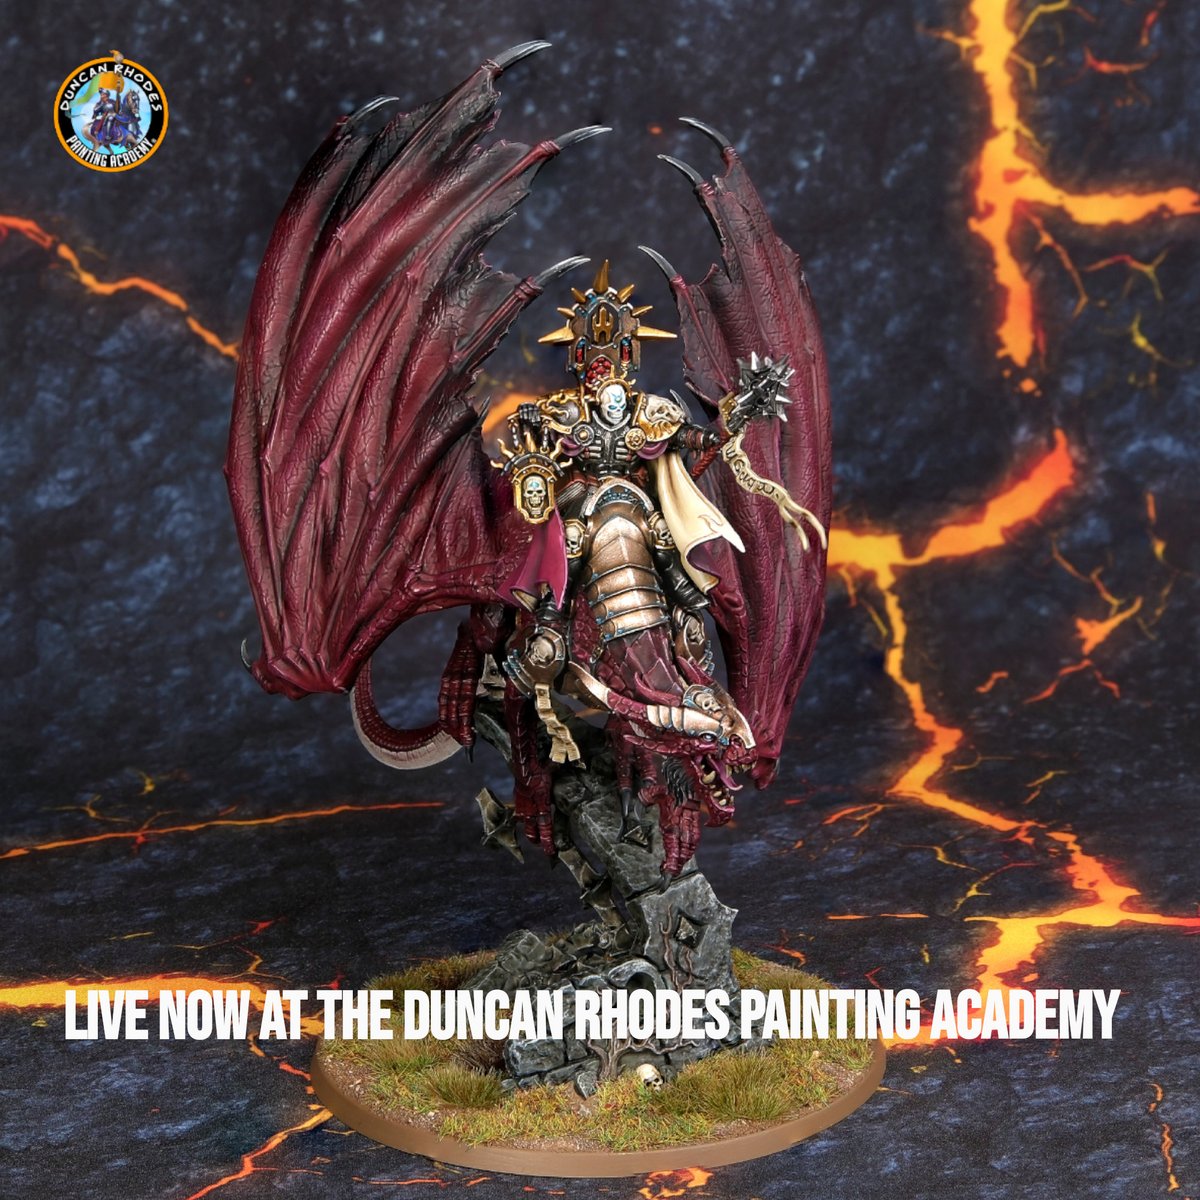 It has been a mad and crazy week but we just got this bad boy live! Check it out at the Duncan Rhodes Painting Academy now! What do you think? #aos #wardenoflostsouls #paintingwarhammer #paintingminis #paintingminiatures #drpa #twothincoats #2thincoats #ionuscryptborn